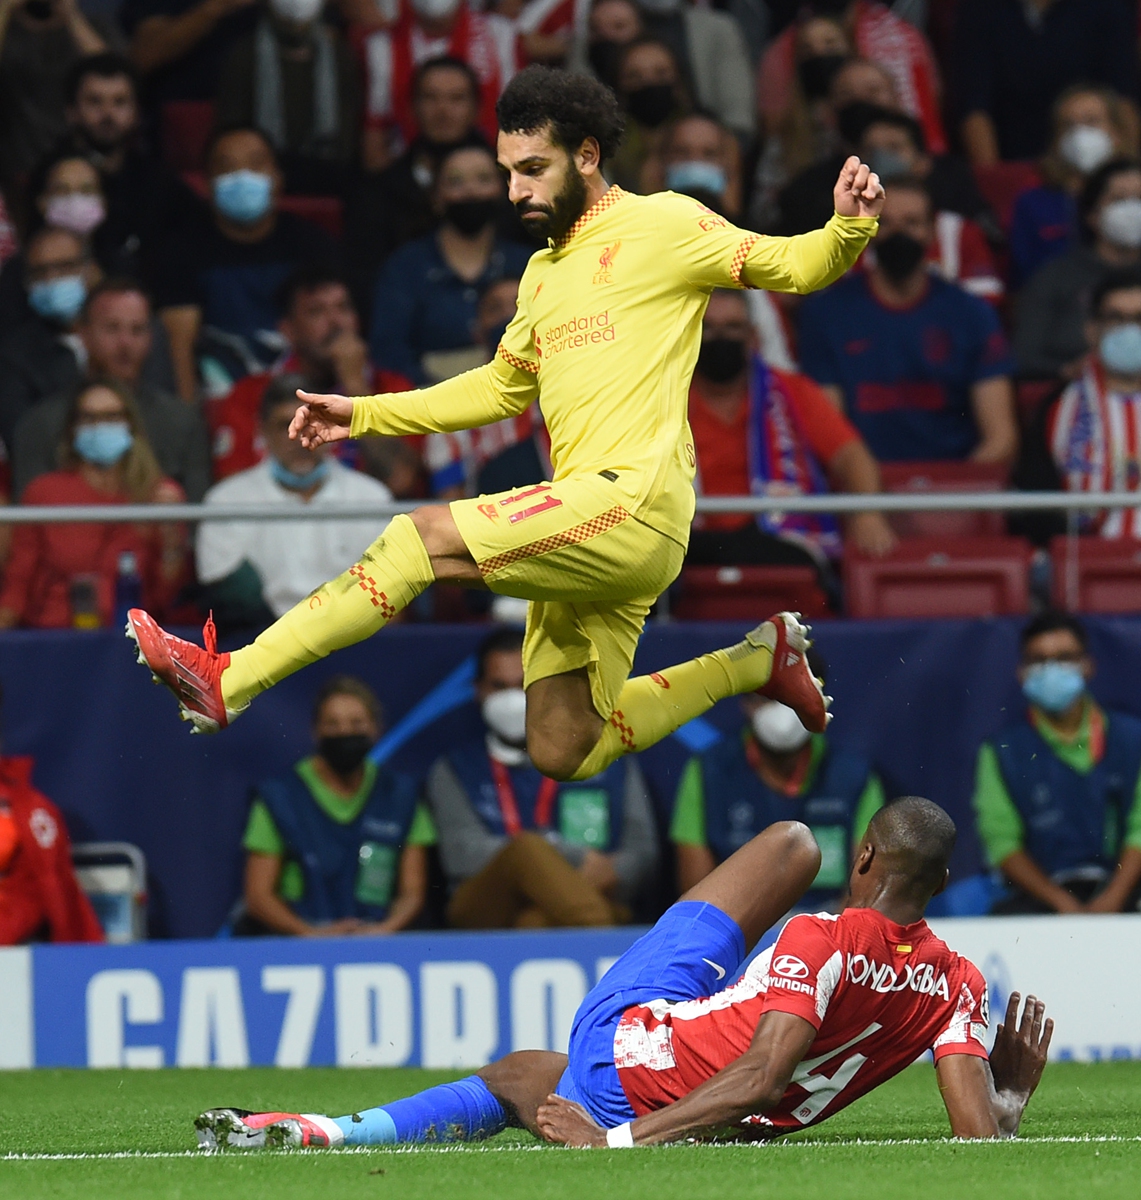 Mohamed Salah (above) of Liverpool evades a tackle from Geoffrey Kondogbia of Atletico Madrid on October 19 in Madrid, Spain. Photo: VCG